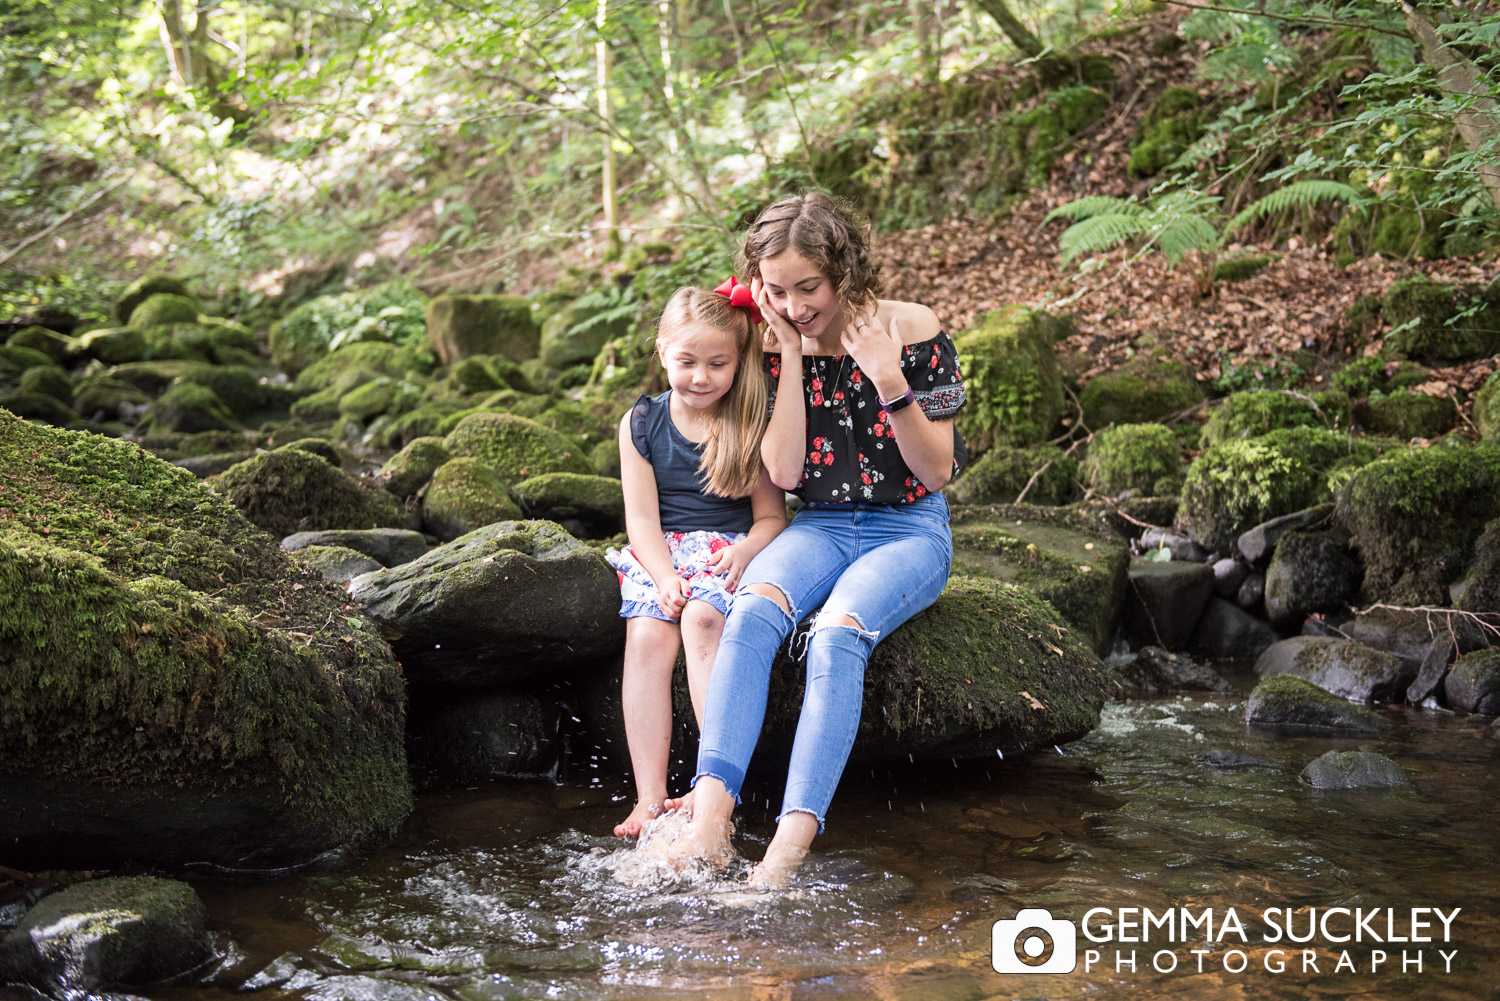 sister dipping their feet in a stream in sutton in craven during their lifestyle photo shoot